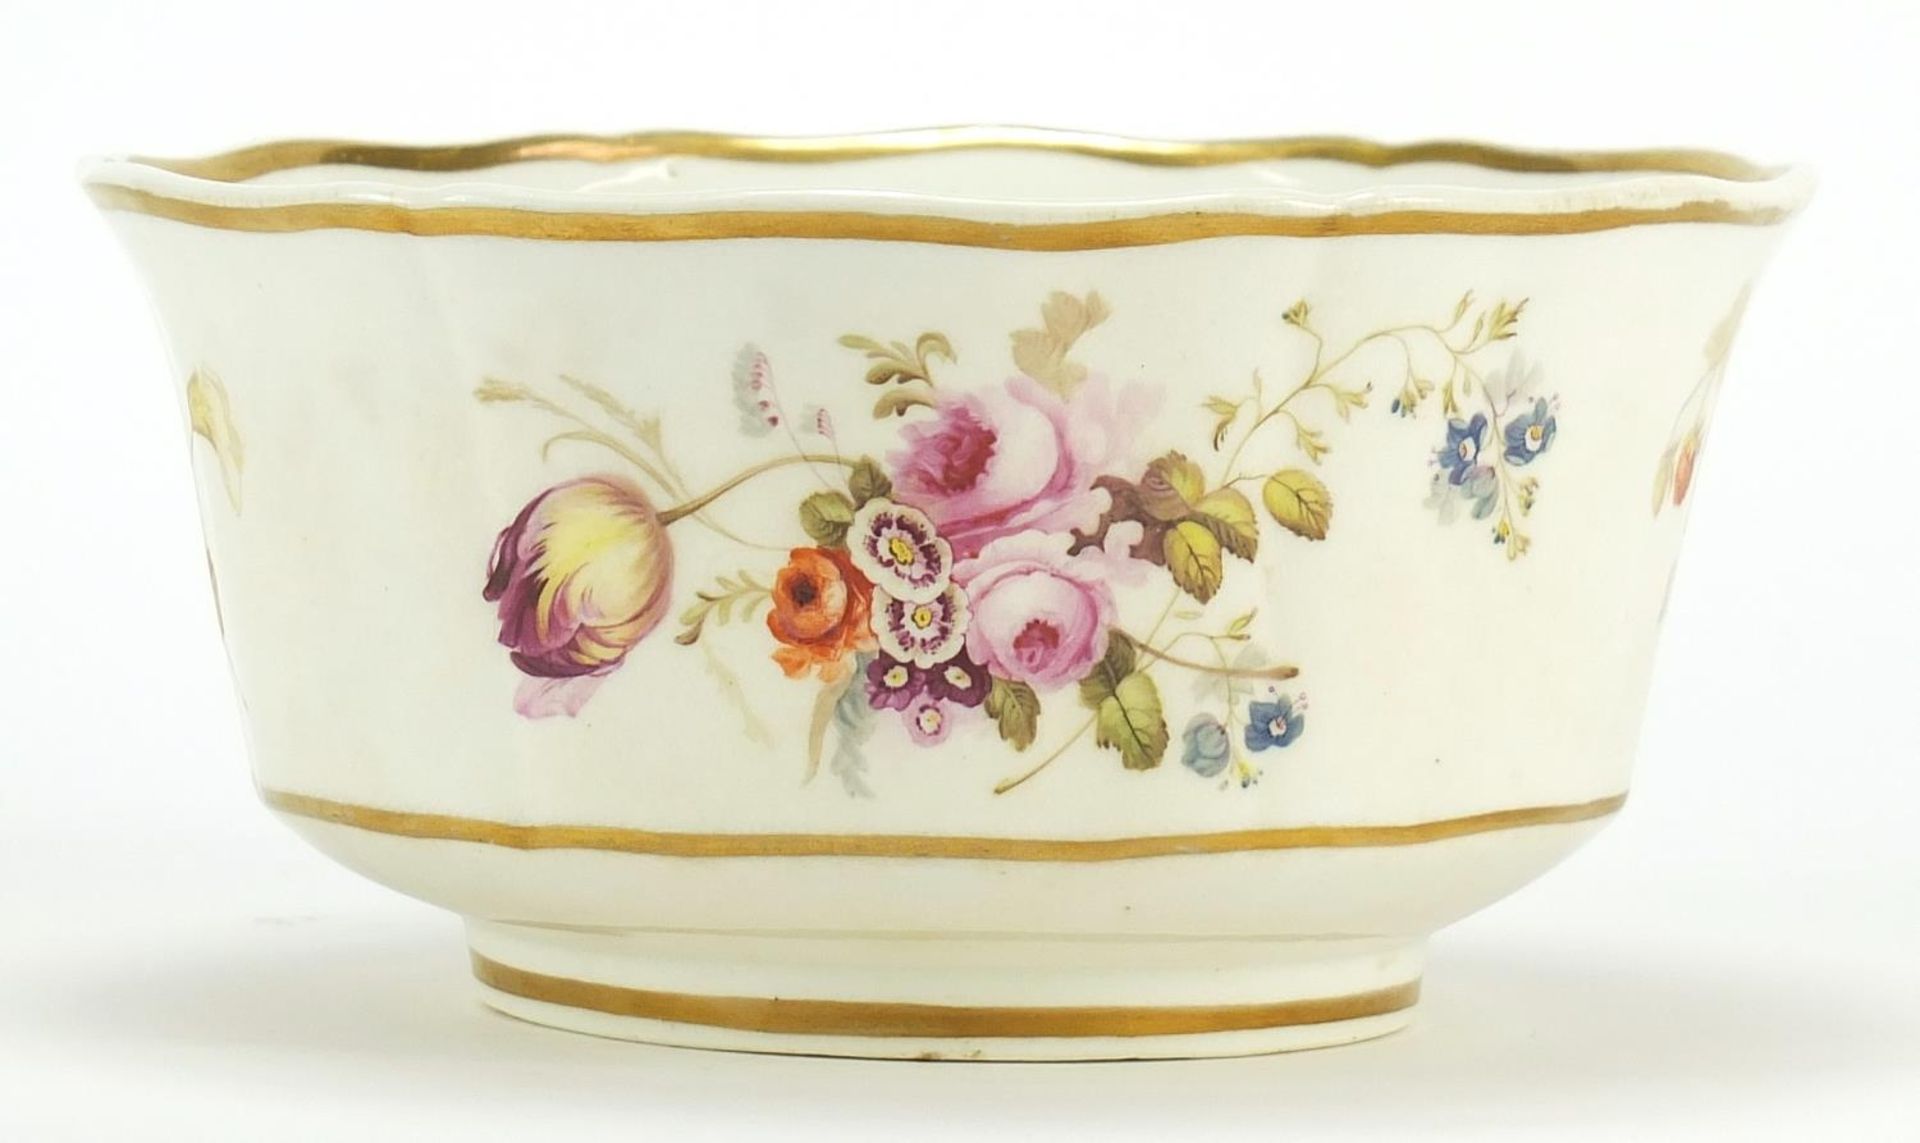 Swansea style bowl hand painted in the style of Sir Leslie Joseph and William Pollard, 18cm in